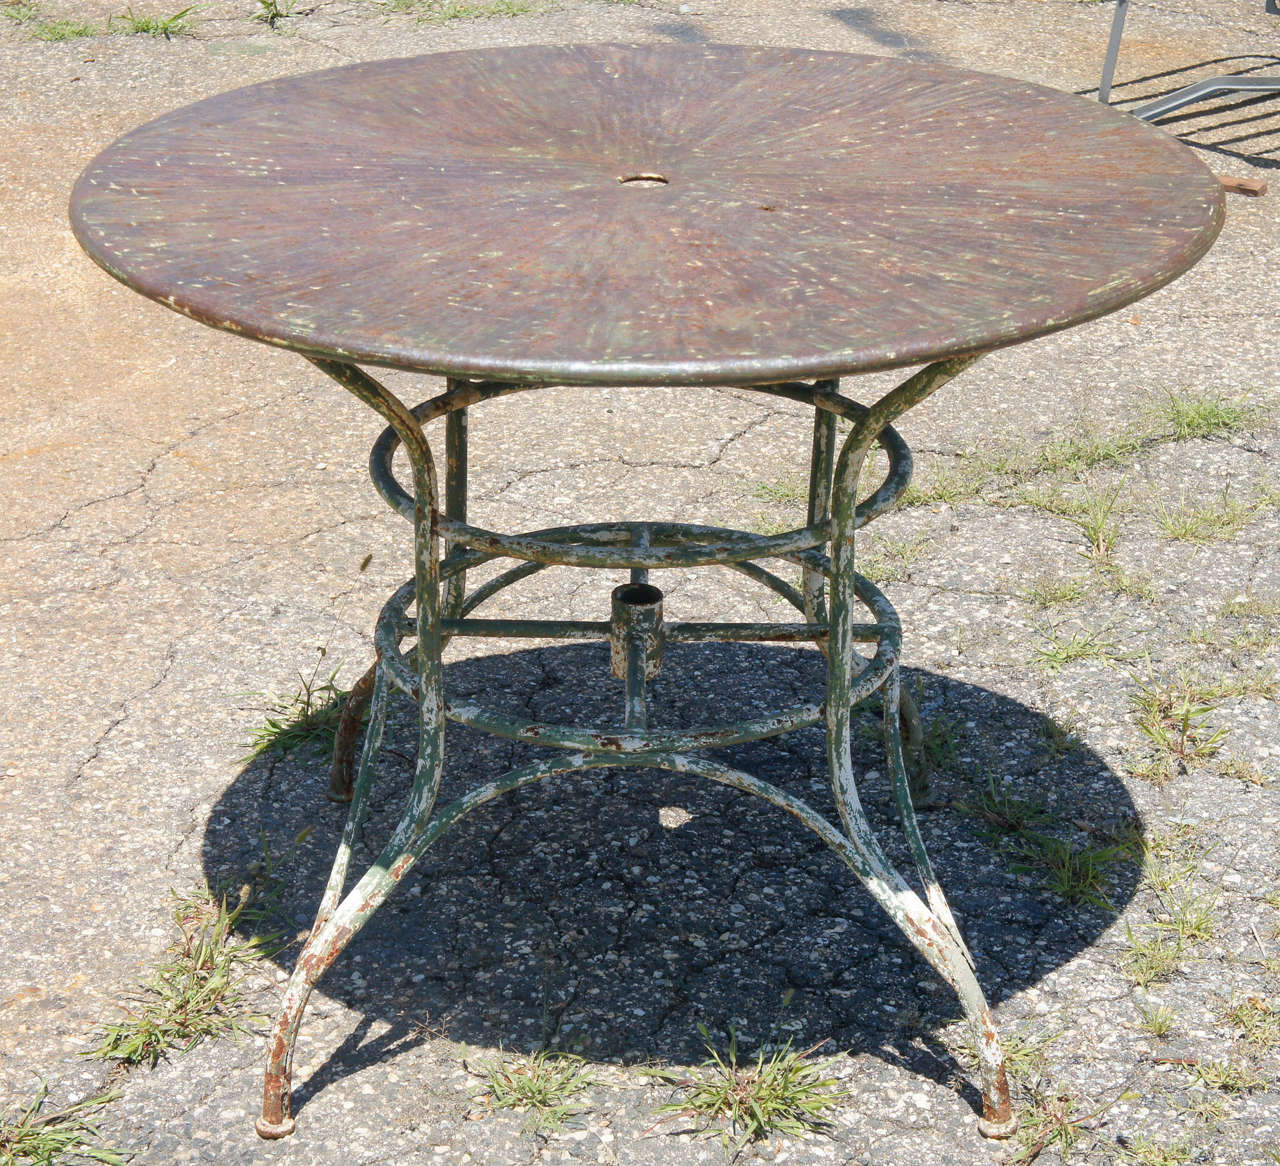 An unique indoor or outdoor round metal garden umbrella table with surface of colors splayed from the center.  This garden or patio table of steel is made to hold an umbrella with a hole in the center and tubing attached to the leg frame.

Base: 